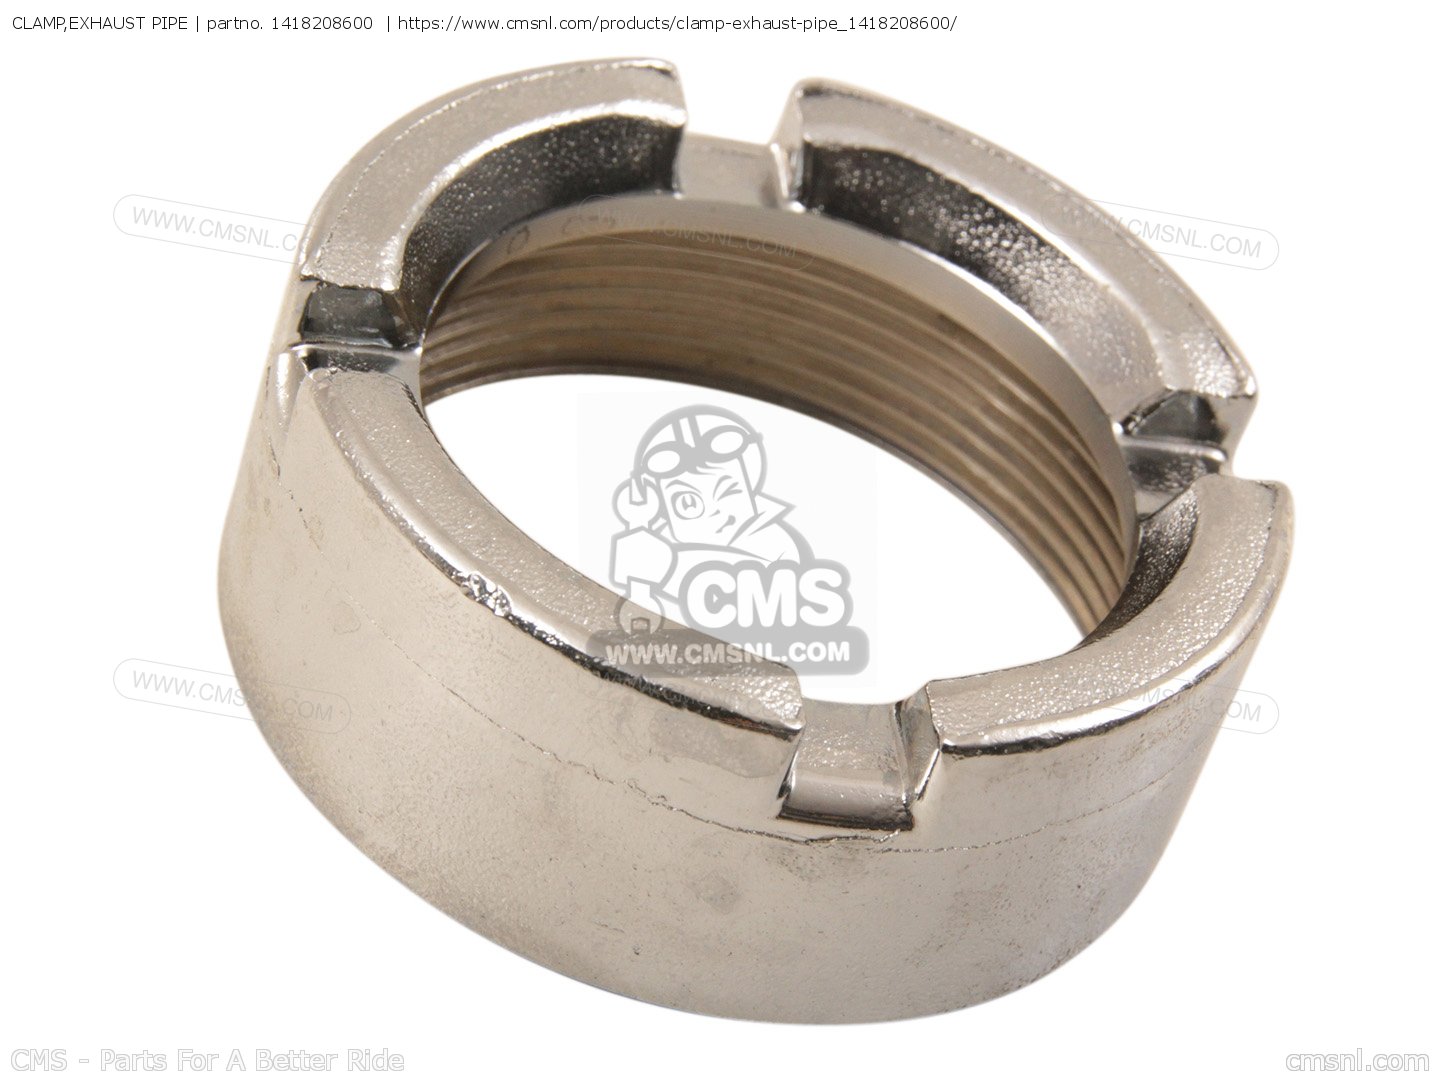 CLAMP,EXHAUST PIPE for B100 - order at CMSNL